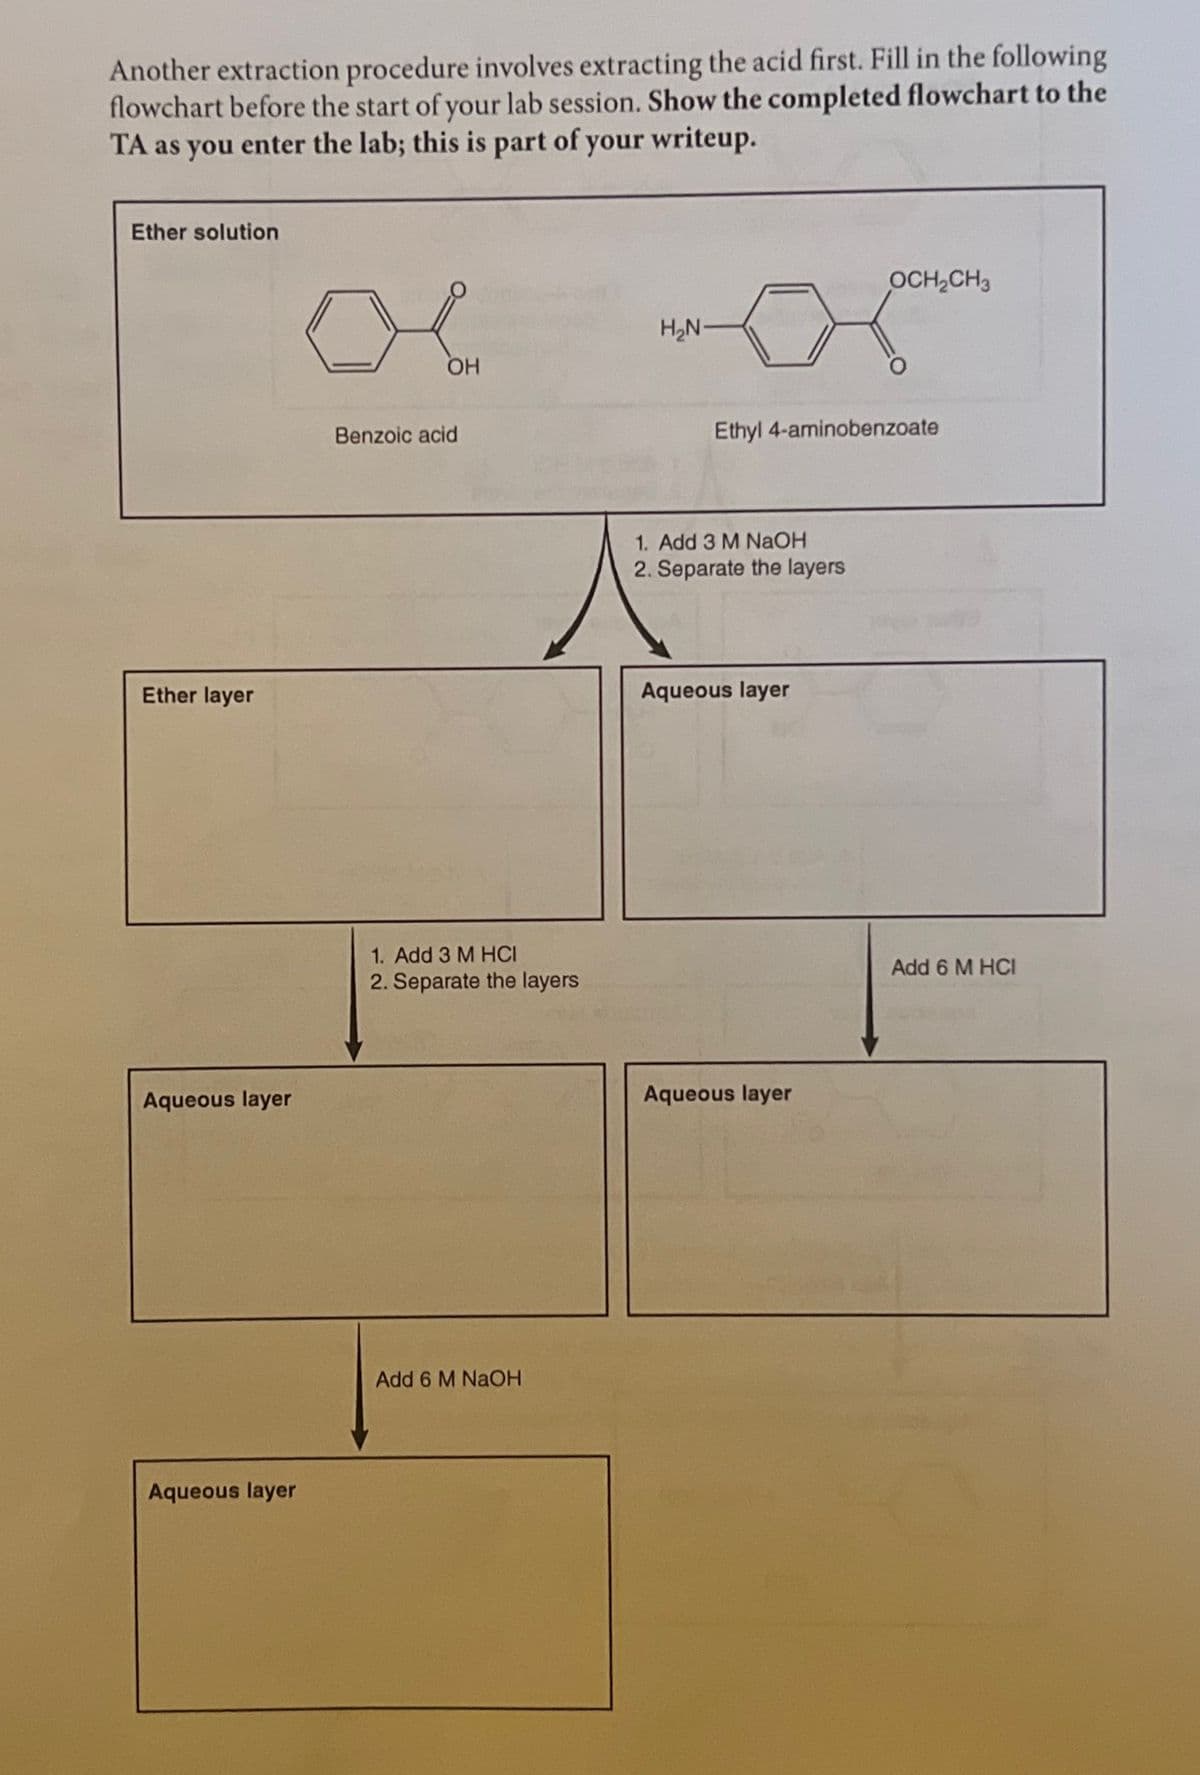 Another extraction procedure involves extracting the acid first. Fill in the following
flowchart before the start of your lab session. Show the completed flowchart to the
TA as you enter the lab; this is part of your writeup.
Ether solution
Ether layer
Aqueous layer
Aqueous layer
OH
Benzoic acid
1. Add 3 M HCI
2. Separate the layers
Add 6 M NaOH
H₂N-
Ethyl 4-aminobenzoate
1. Add 3 M NaOH
2. Separate the layers
Aqueous layer
OCH₂CH3
Aqueous layer
Add 6 M HCI